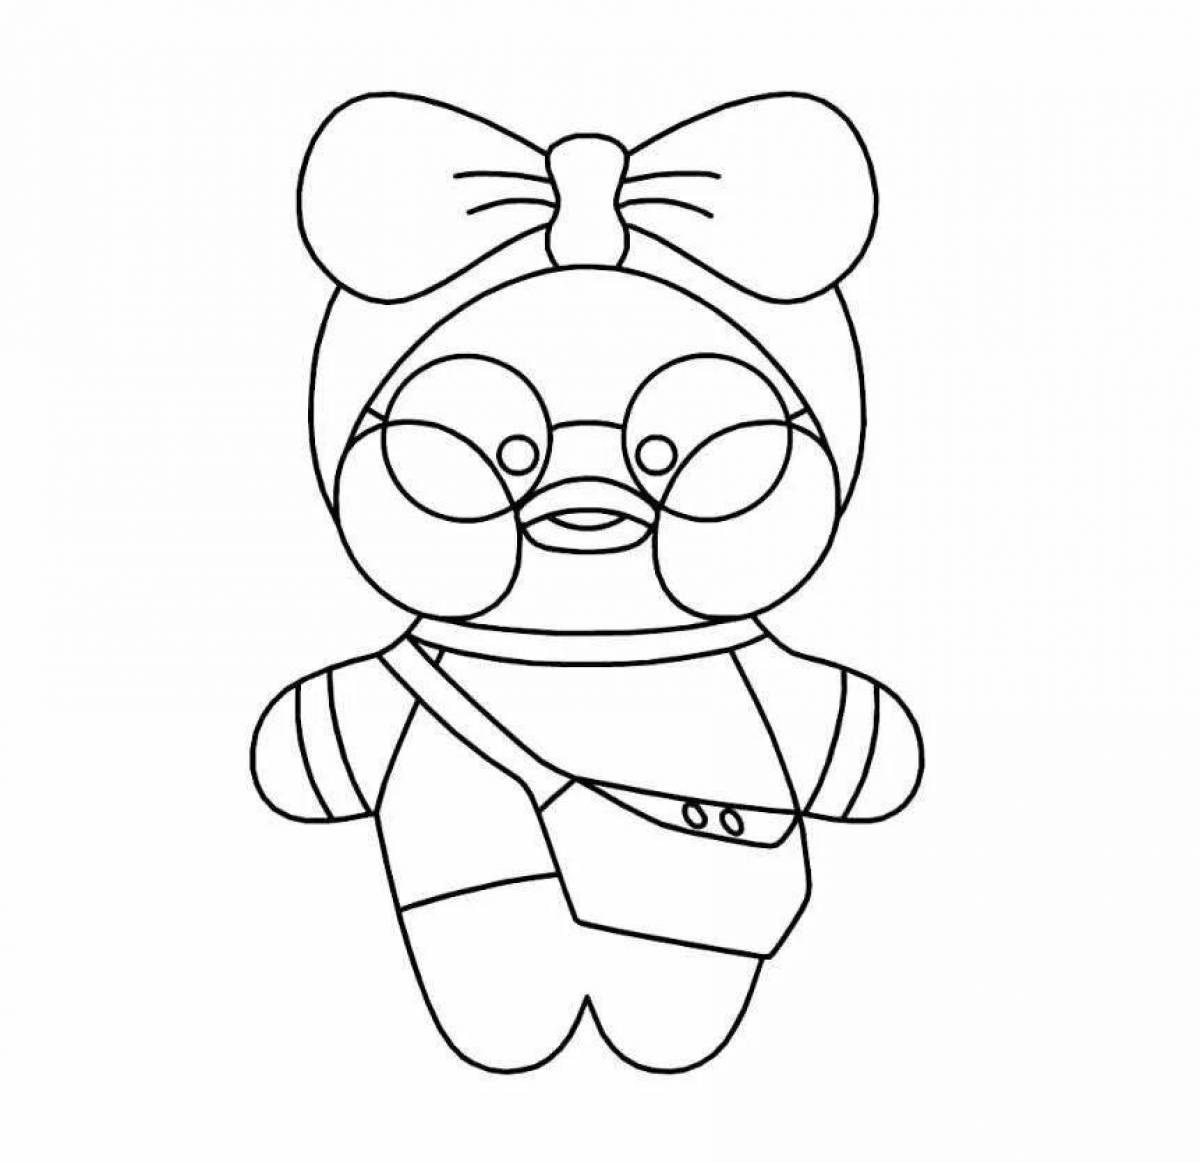 Coloring page ooty lalafan